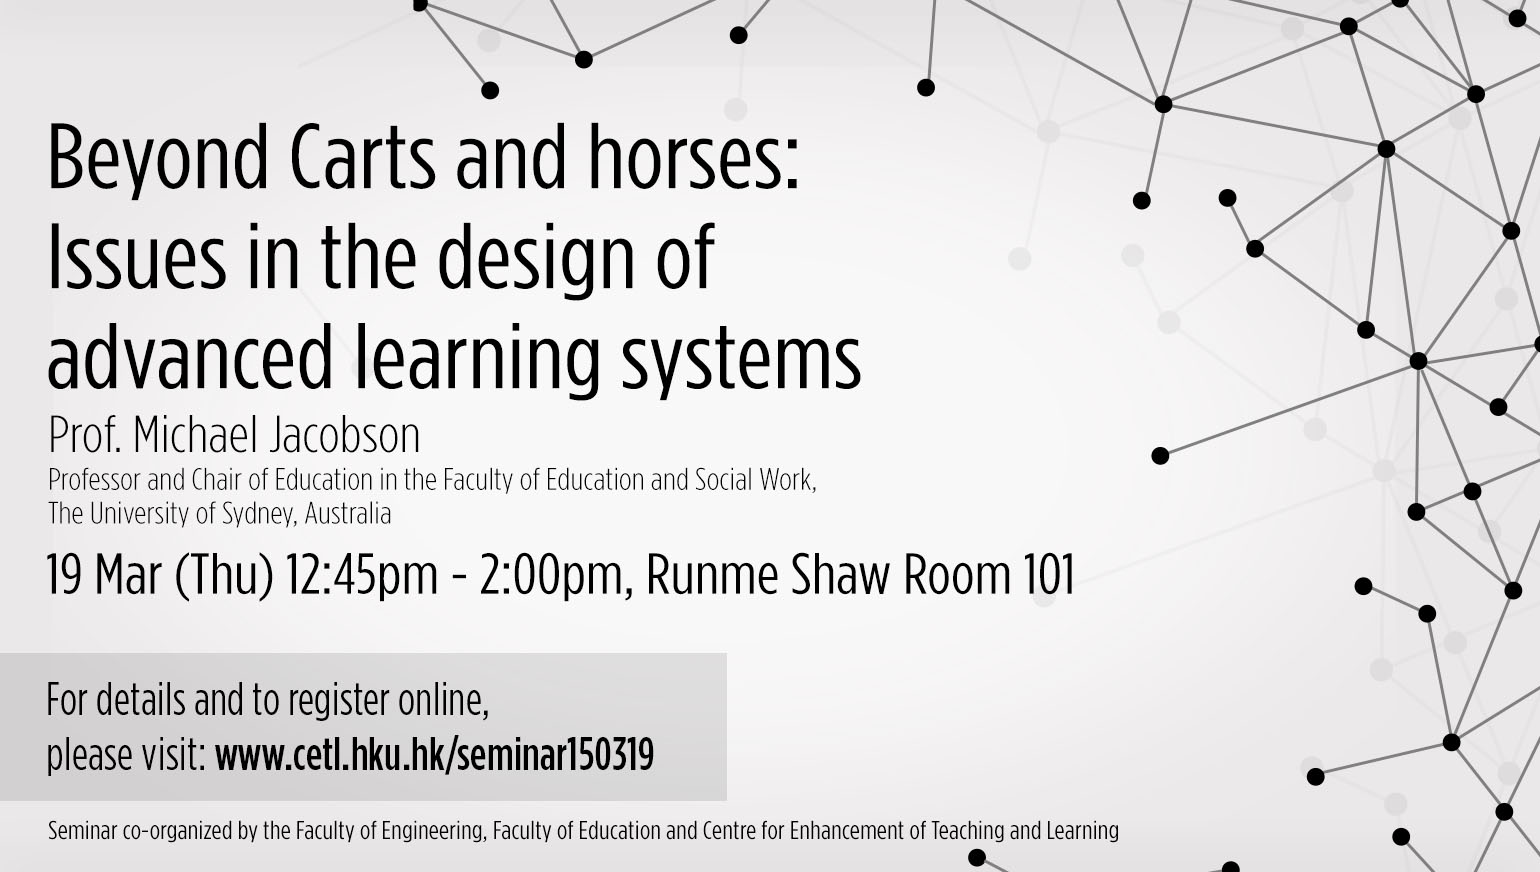 Seminar co-organized by the Faculty of Engineering, Faculty of Education and CETL-Beyond Carts and horses: Issues in the design of advance 